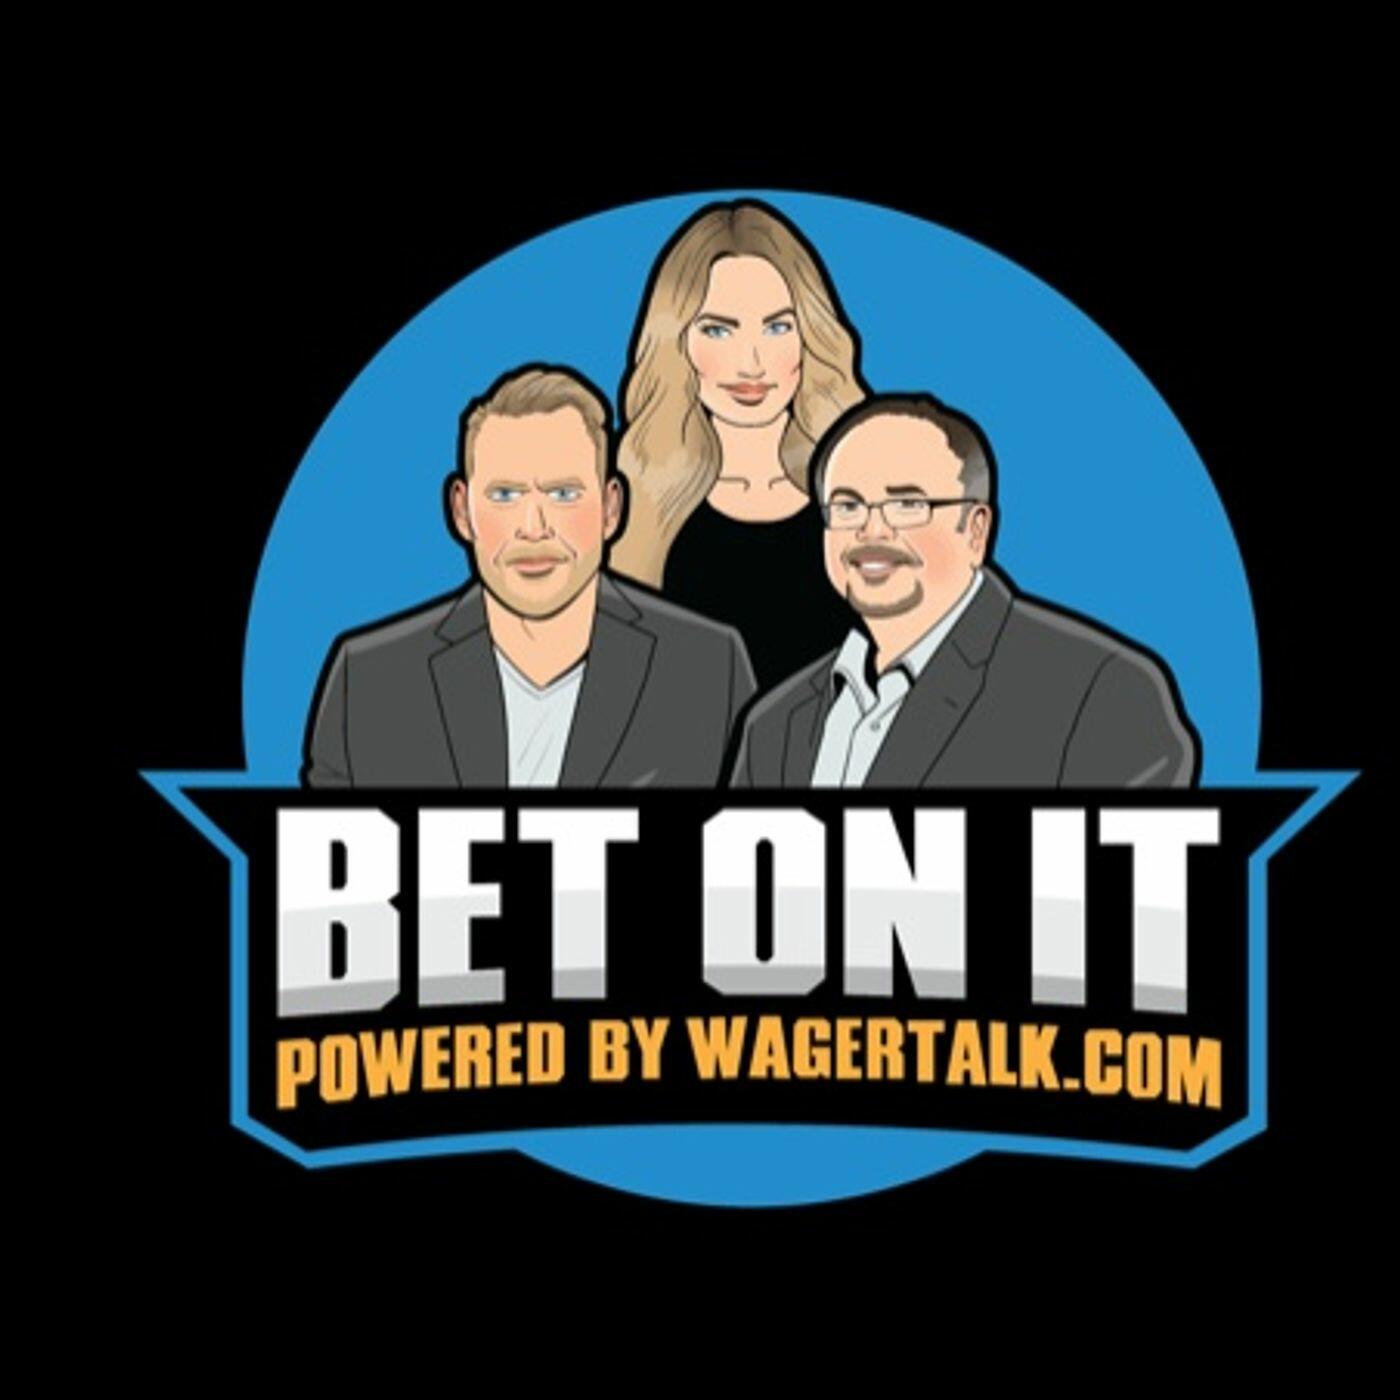 Bet on it wagertalk college football